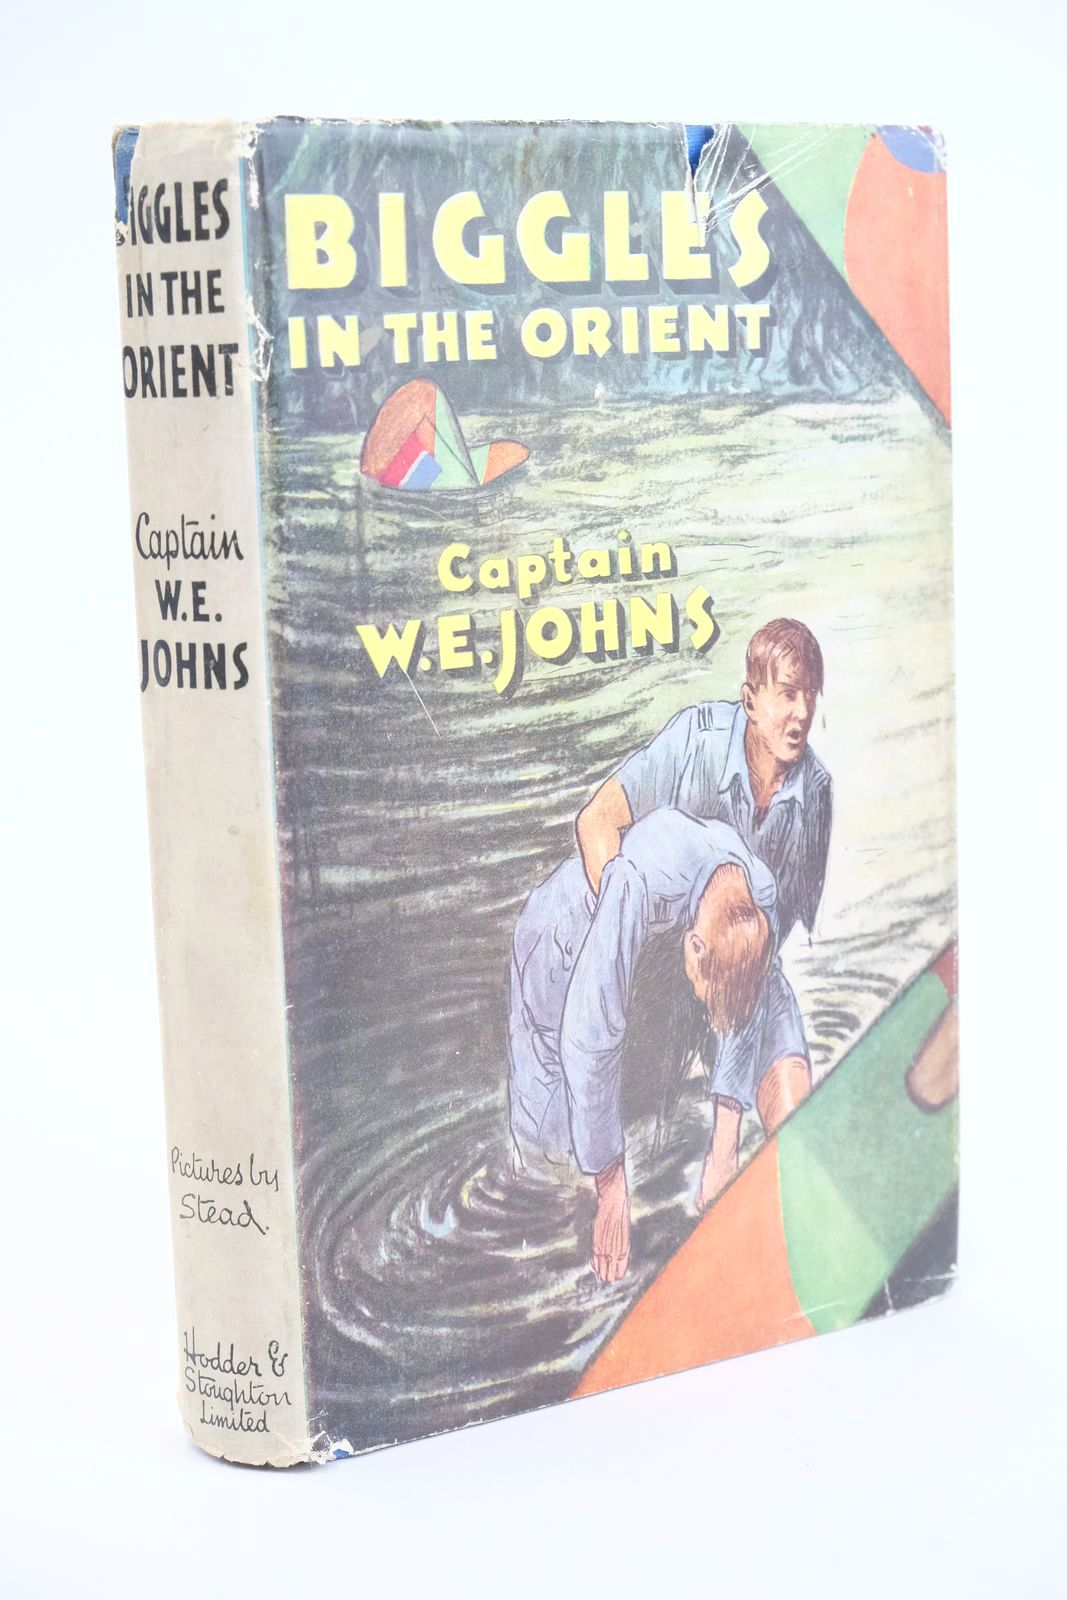 Photo of BIGGLES IN THE ORIENT written by Johns, W.E. illustrated by Stead, published by Hodder &amp; Stoughton (STOCK CODE: 1323878)  for sale by Stella & Rose's Books